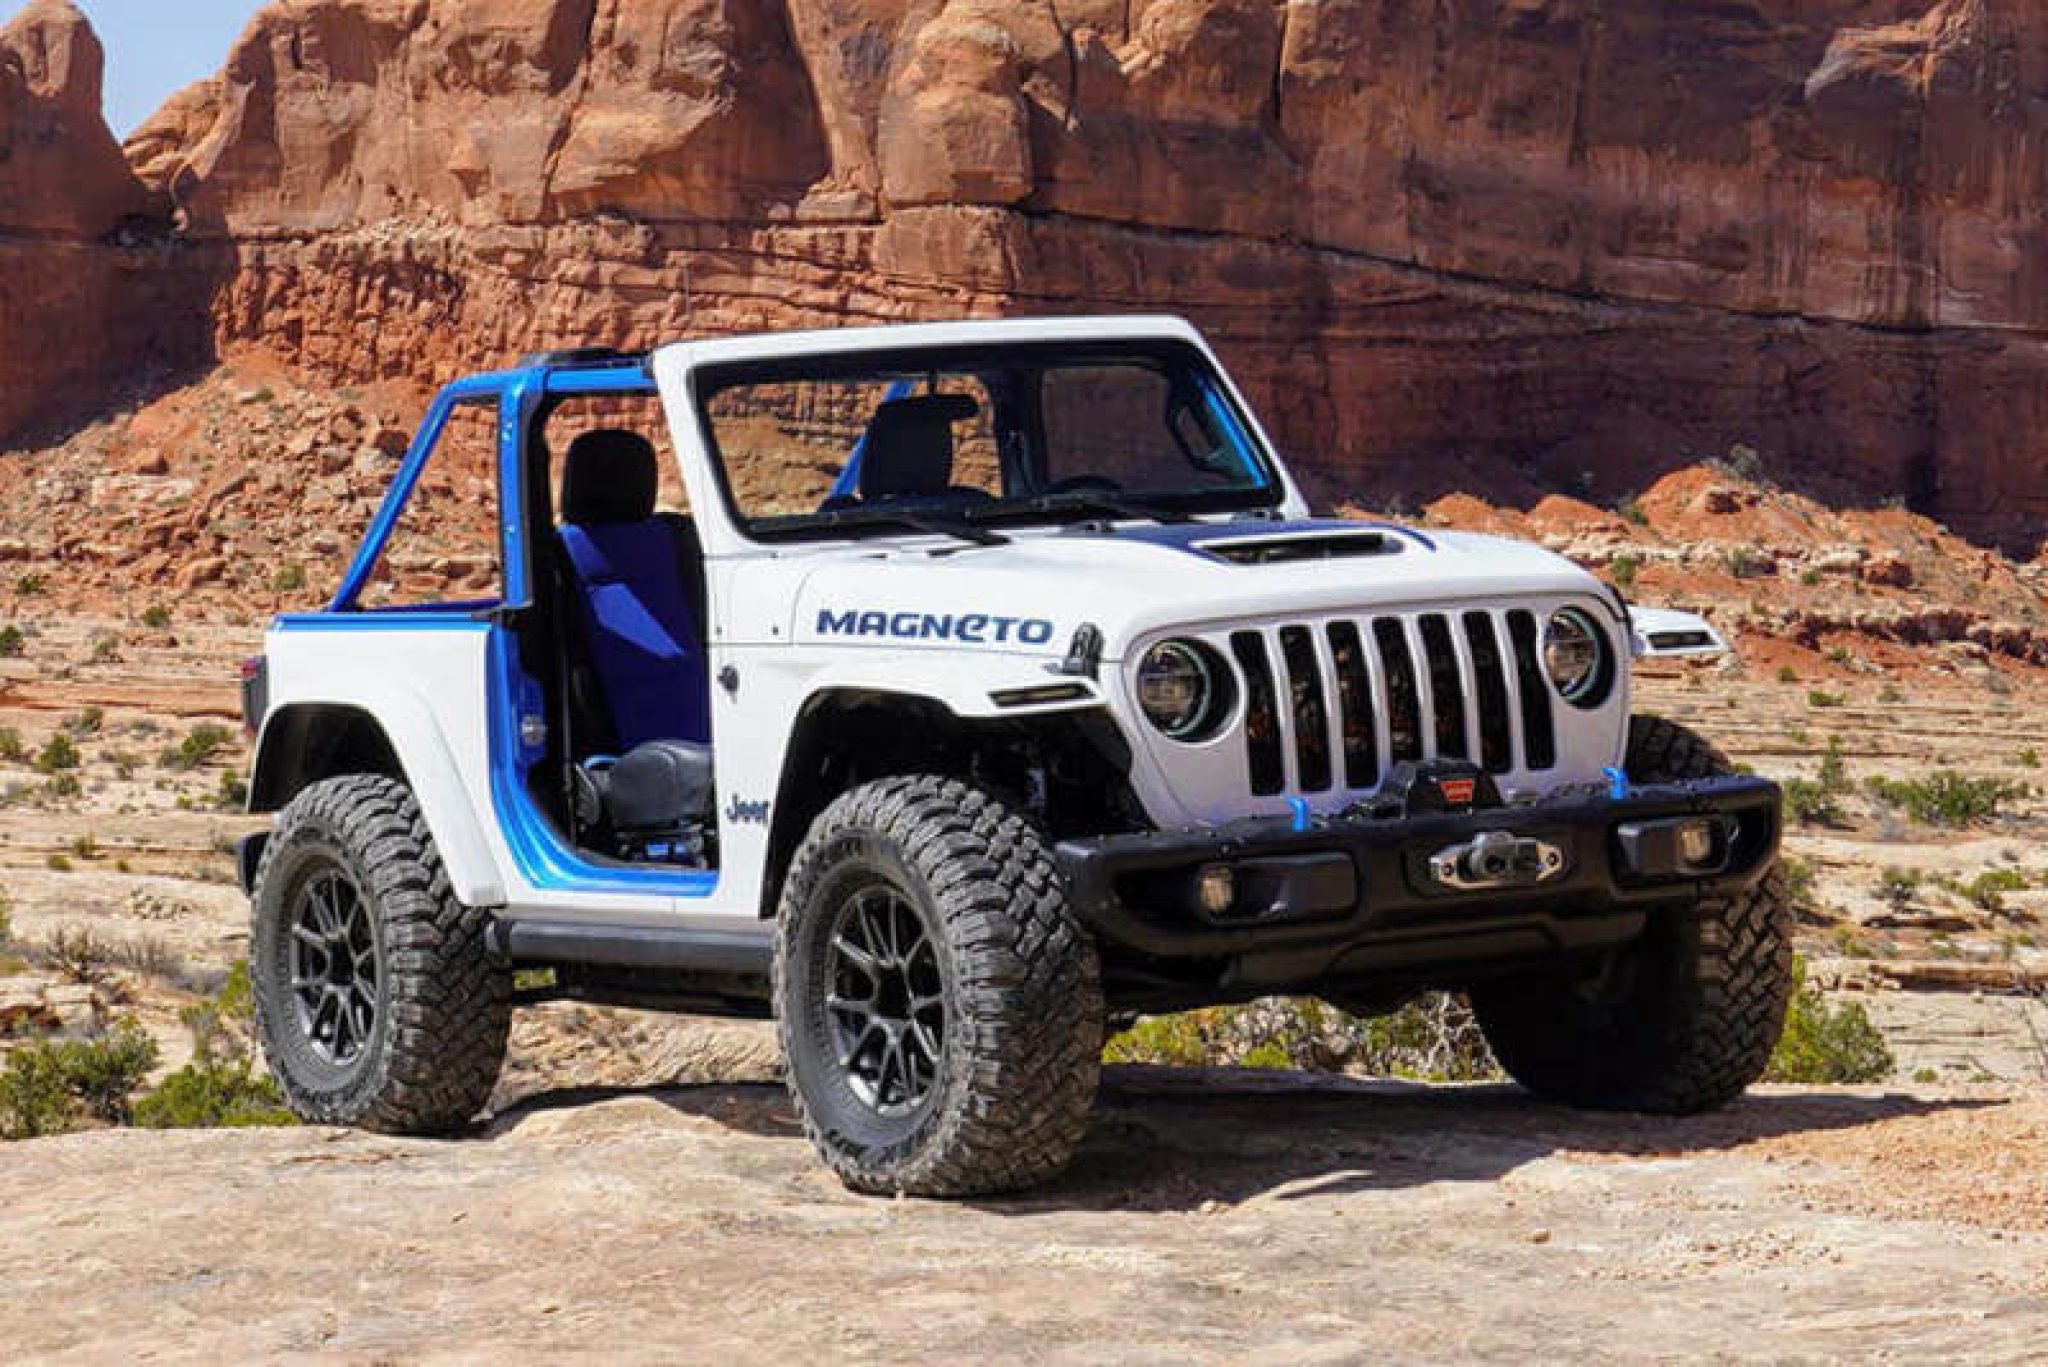 Jeep’s AllElectric Wrangler BEV Concept is More Like a High